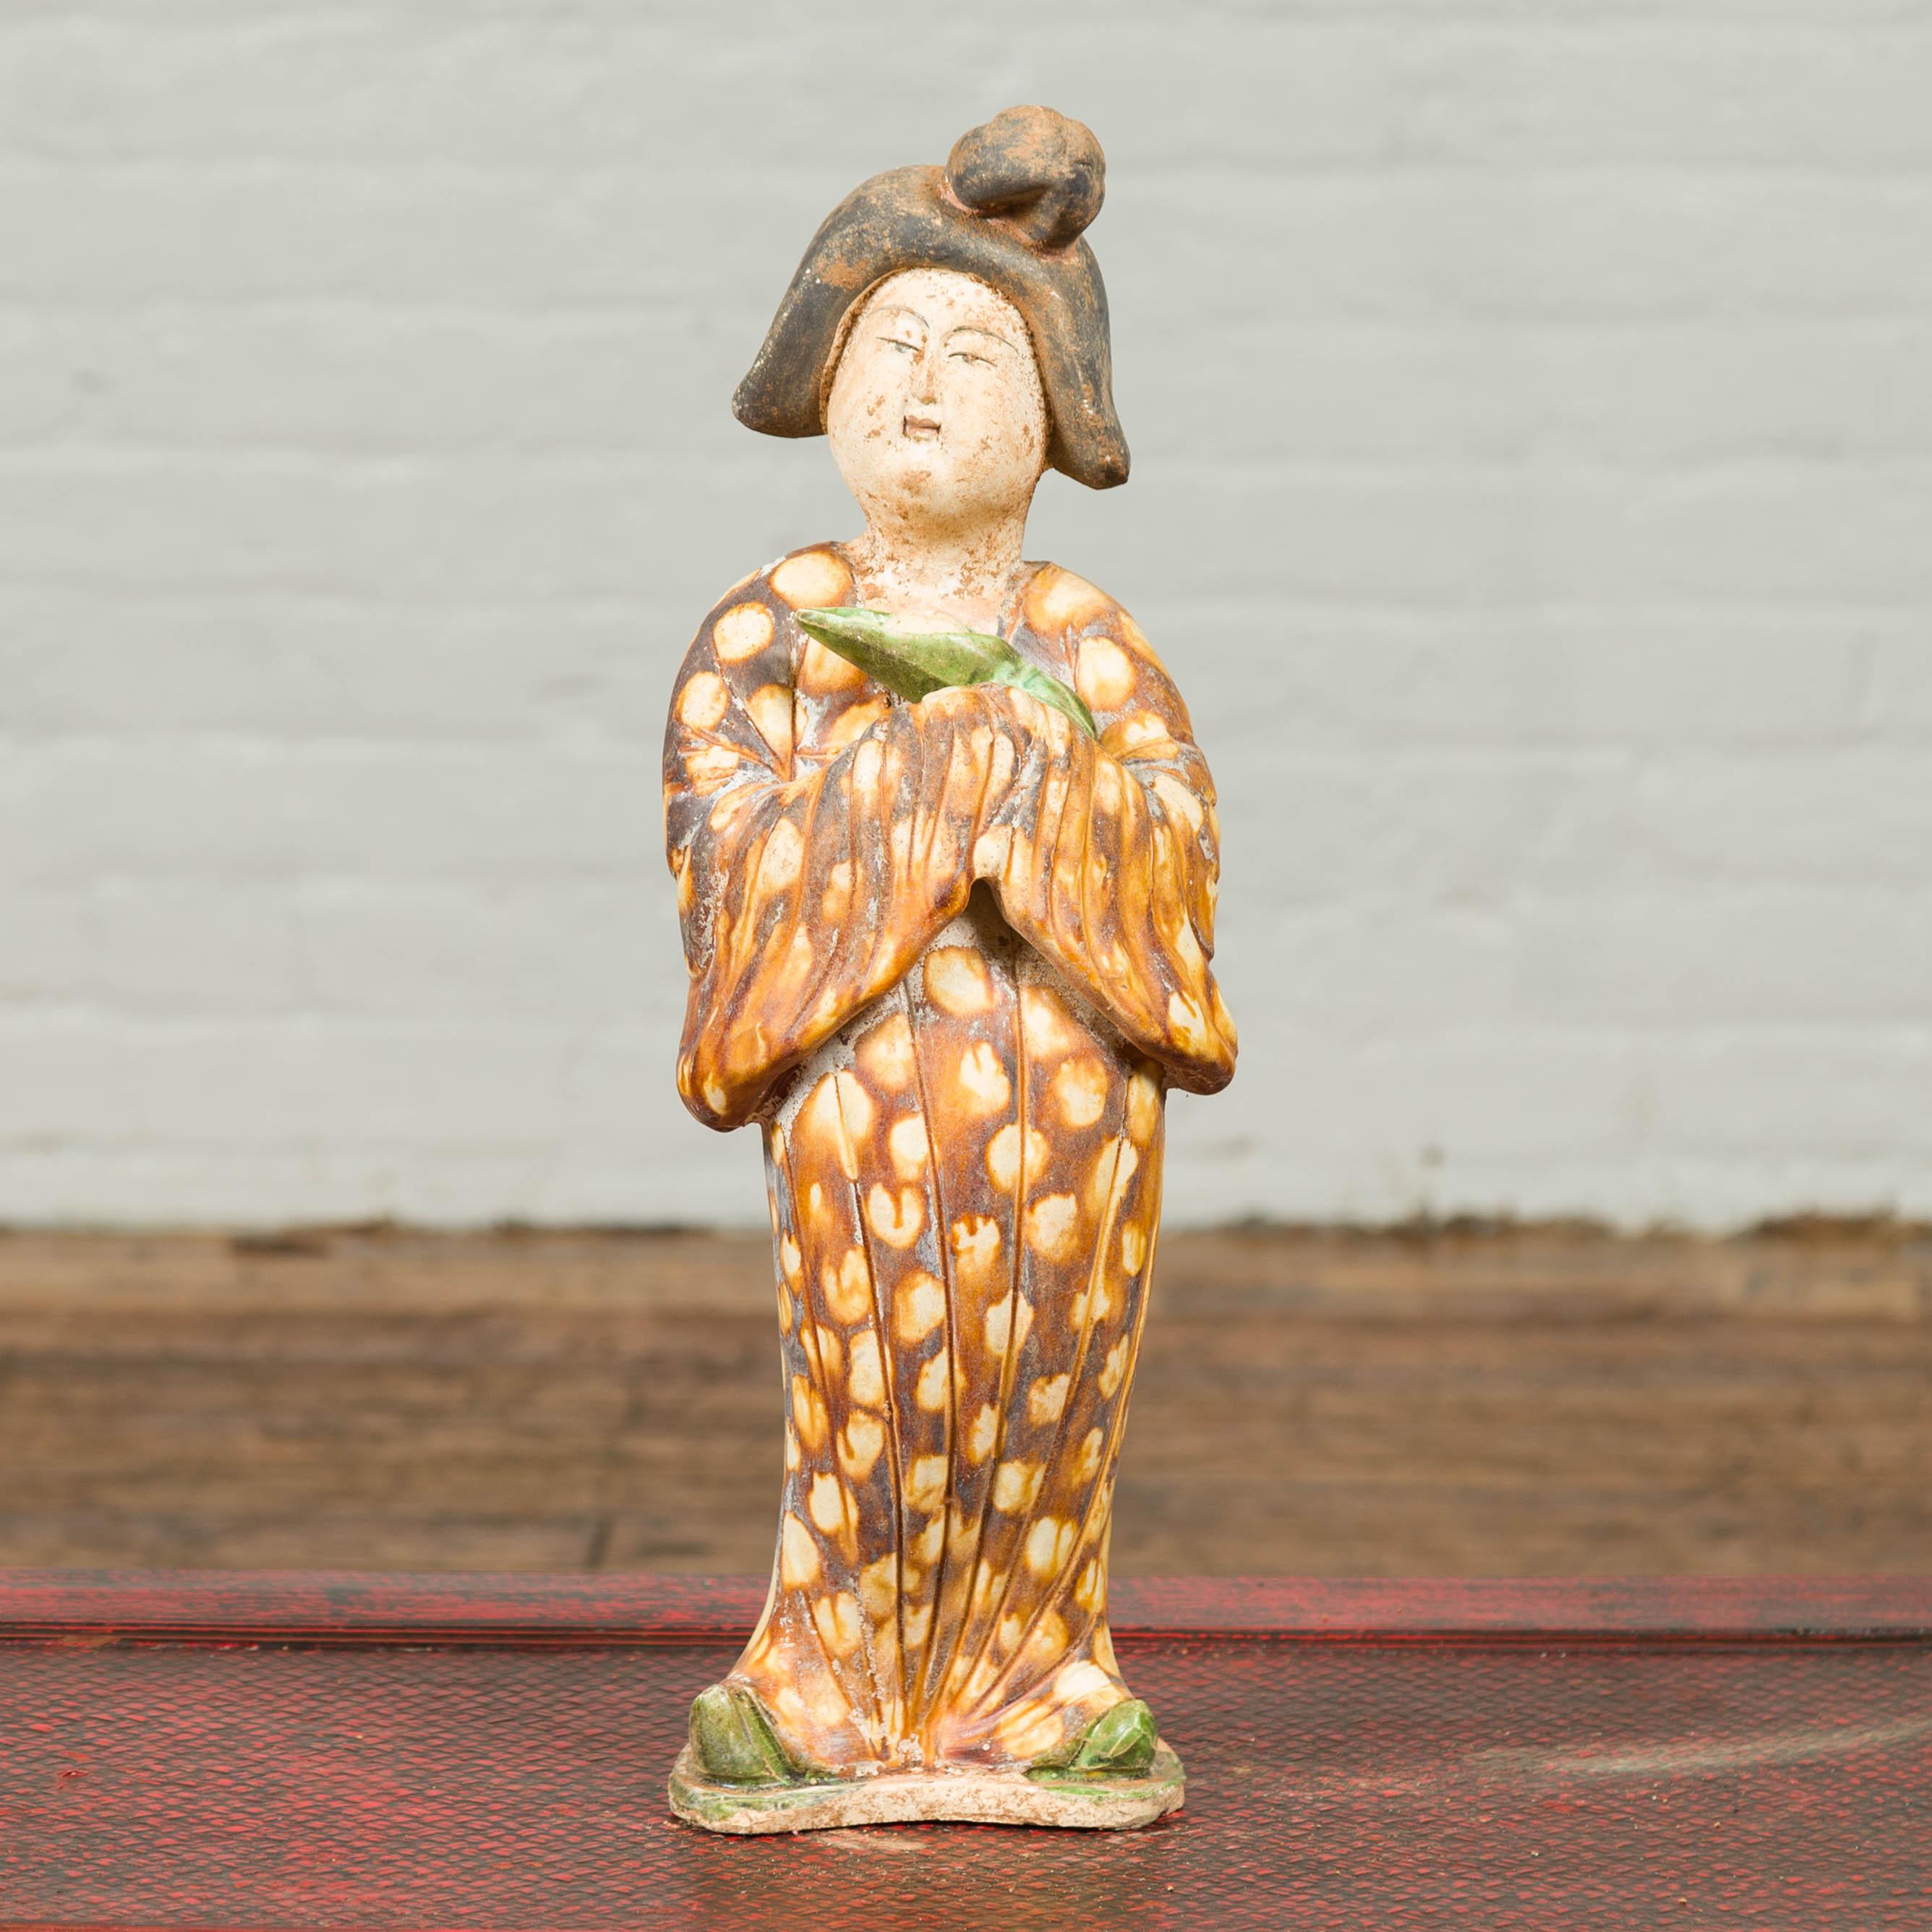 A small Chinese vintage statue of a court lady dressed in a brown geometric patterns kimono and holding a swaddled baby. Tilting her head slightly to the side and wearing a traditional hairstyle, this court lady is dressed in a brown kimono accented